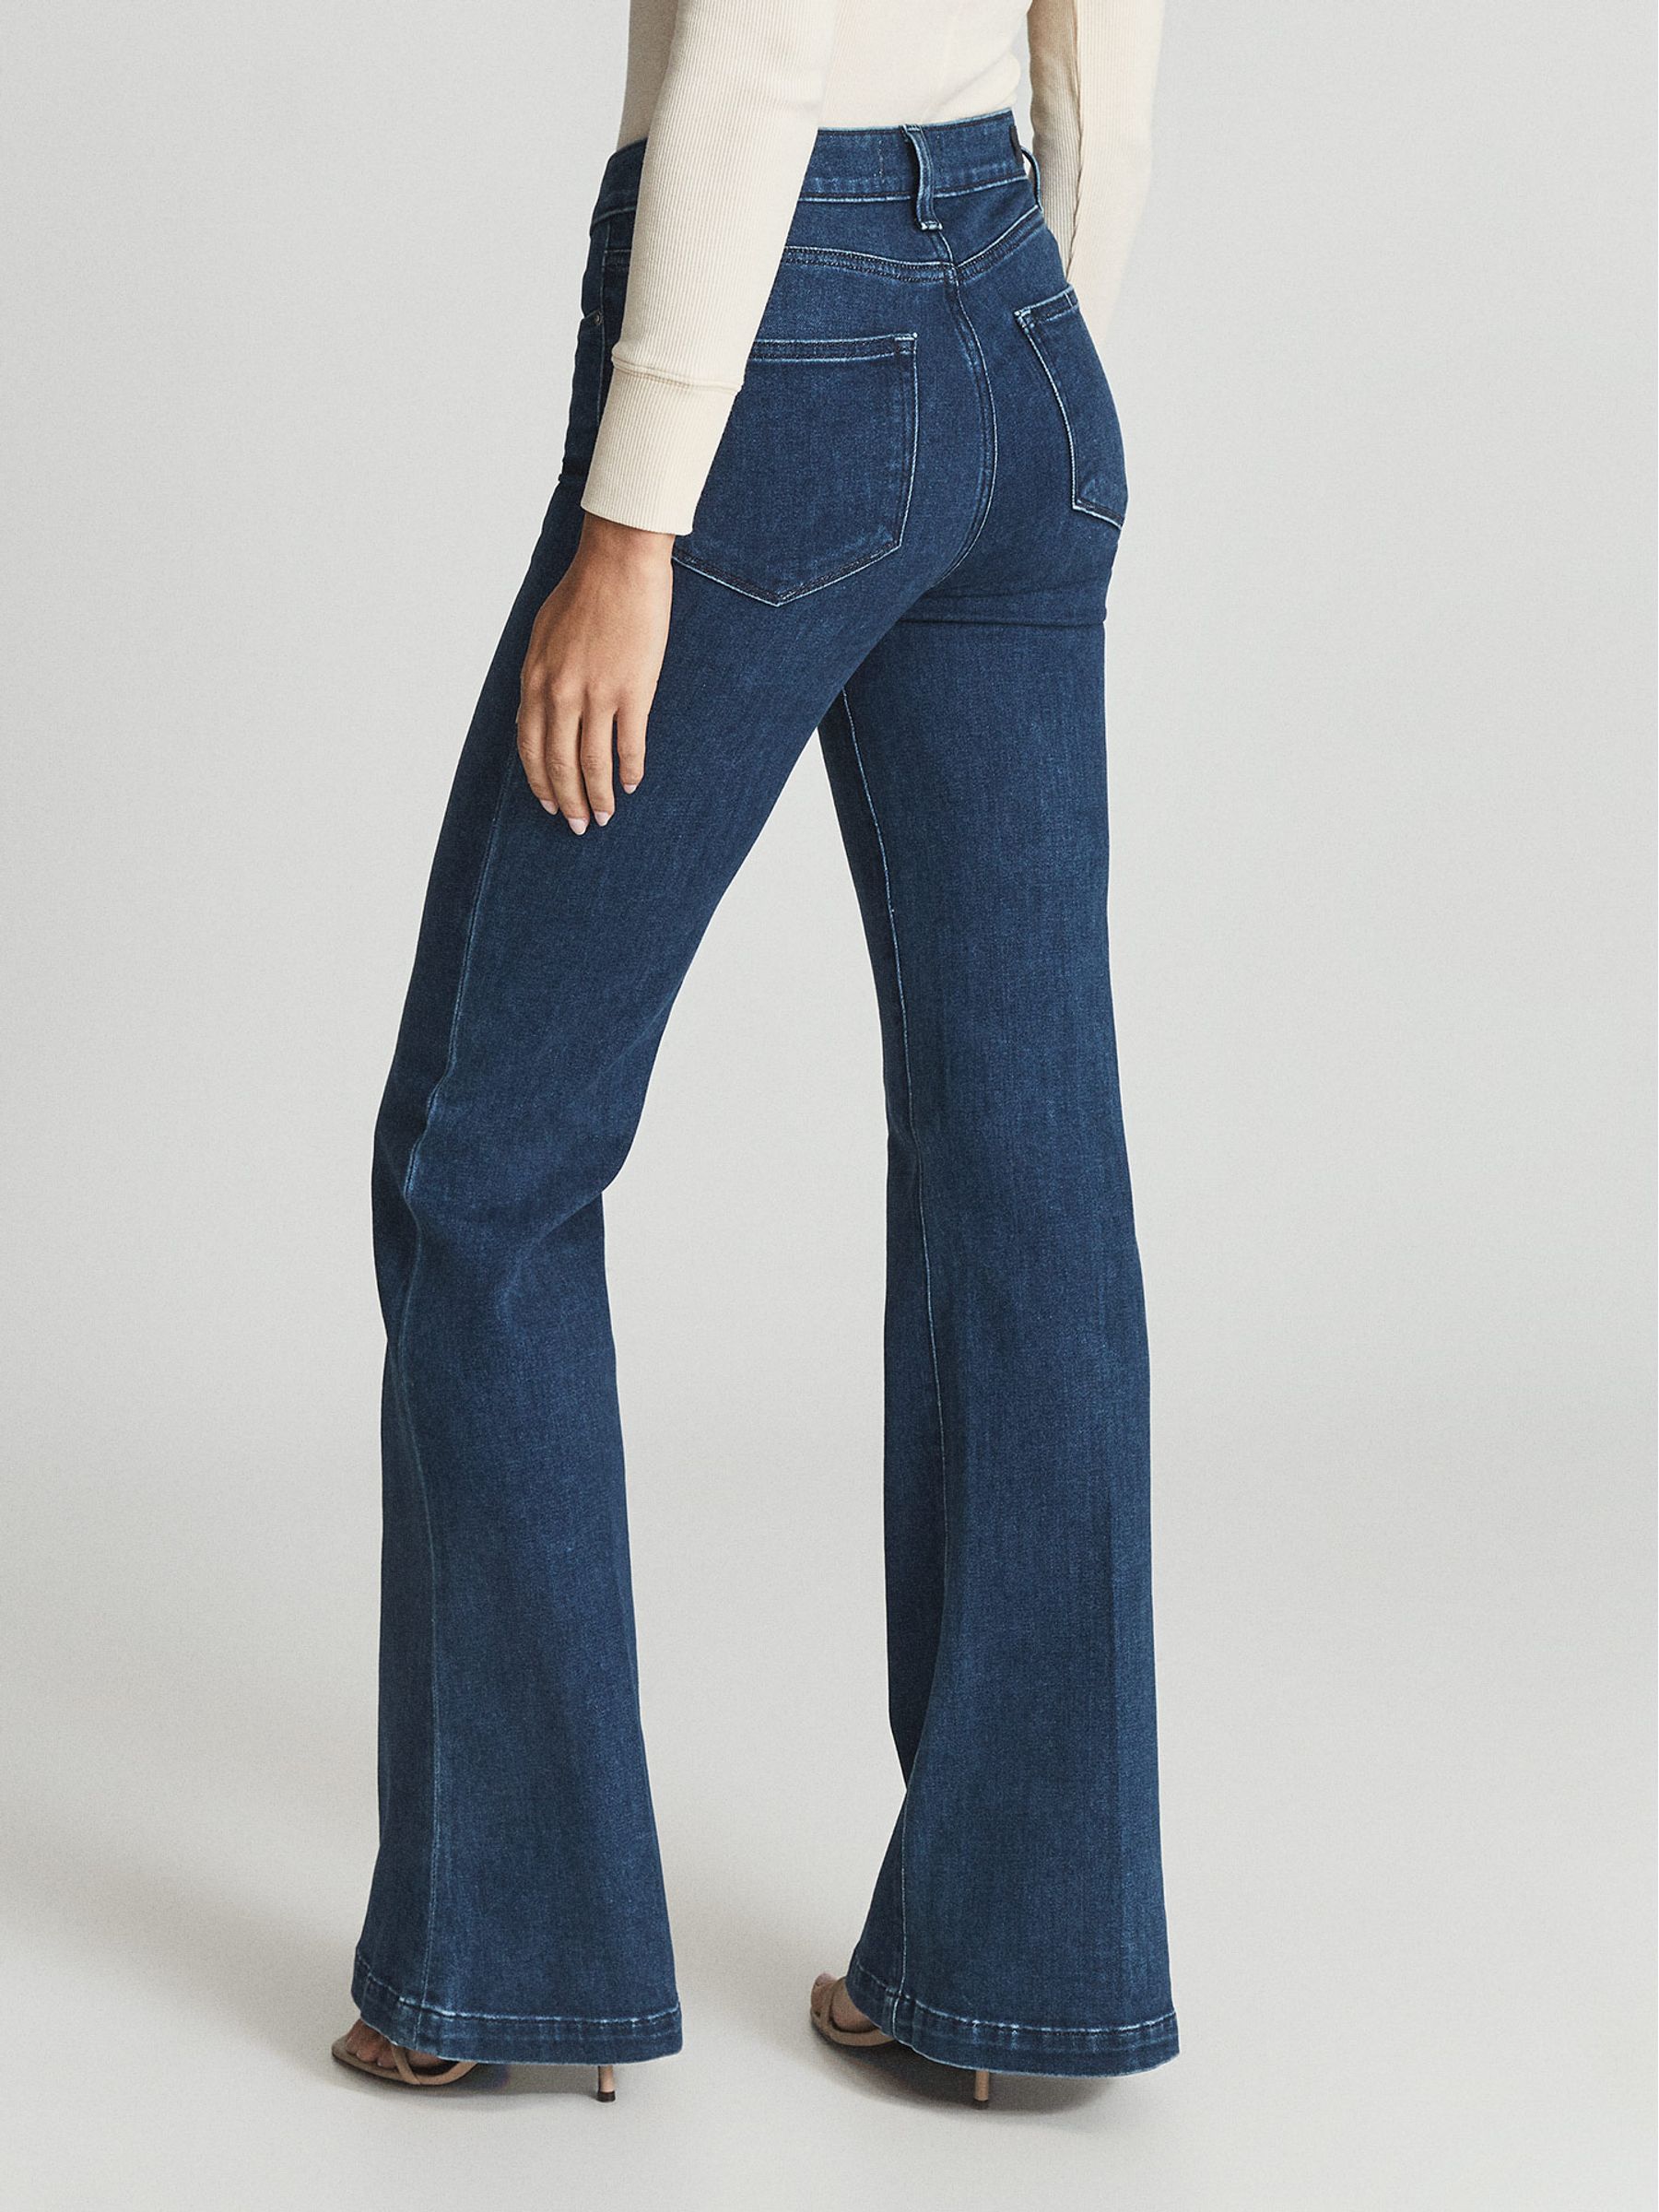 Paige High Rise Flared Jeans in Mid Blue - REISS